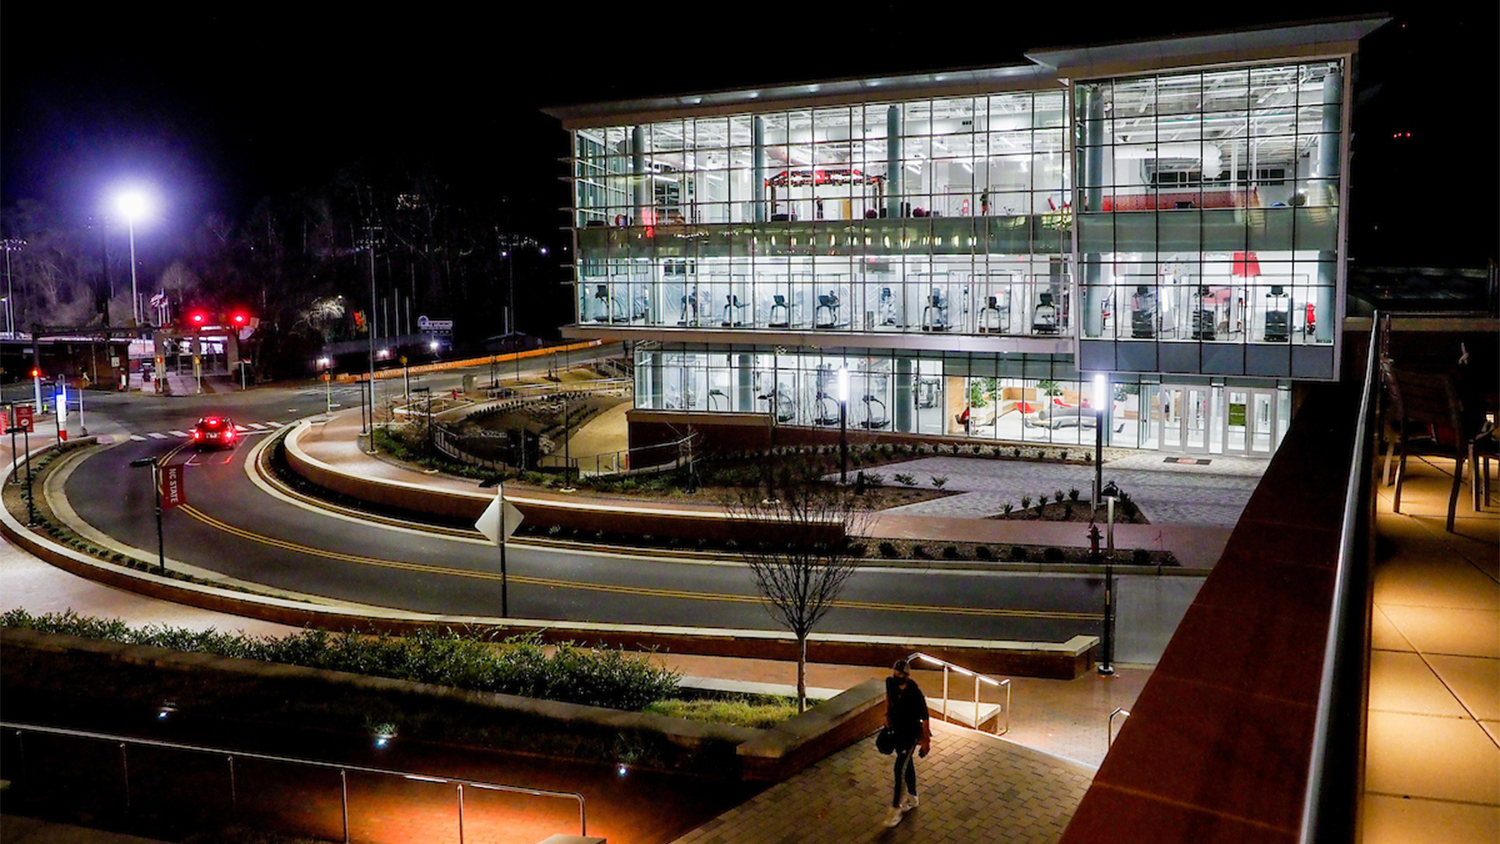 The Wellness and Recreation Center at night